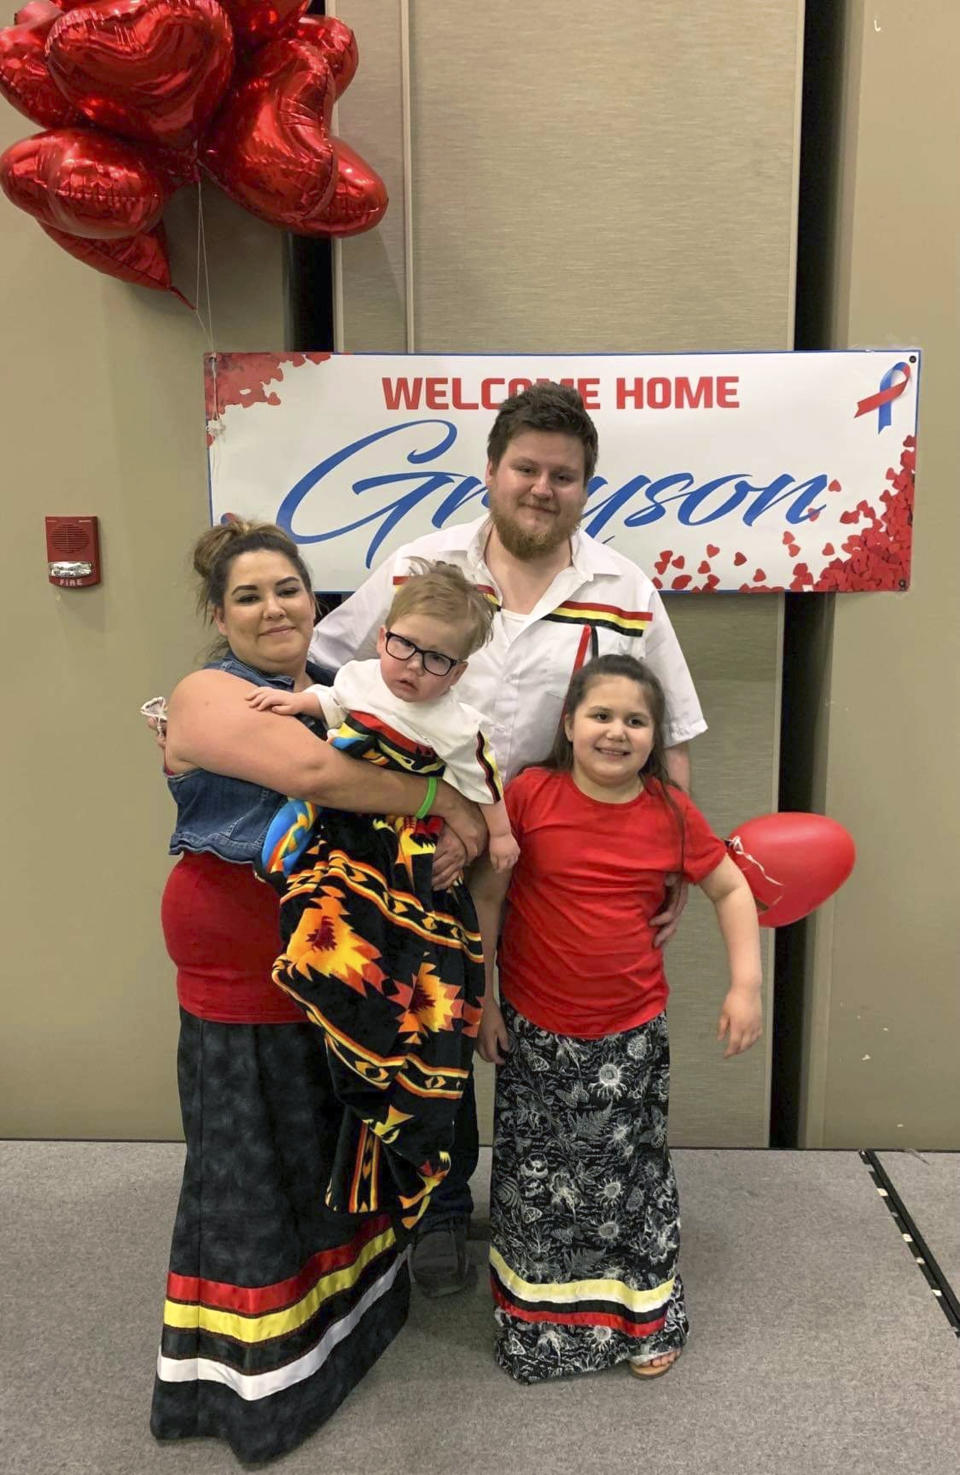 In this photo provided by Joan Azure, Azure's grandson Greyson Parisien, center, is held by mother, Reeanne, while posing for a photo with dad, Ridge Parisien, and sister, Parker, after Greyson returned home to Belcourt, N.D, in July 2019, after a heart transplant. Greyson's journey to correct a heart defect led the Turtle Mountain Band of Chippewa Indians to designate a spot on tribal IDs for organ donation. (Joan Azure via AP)